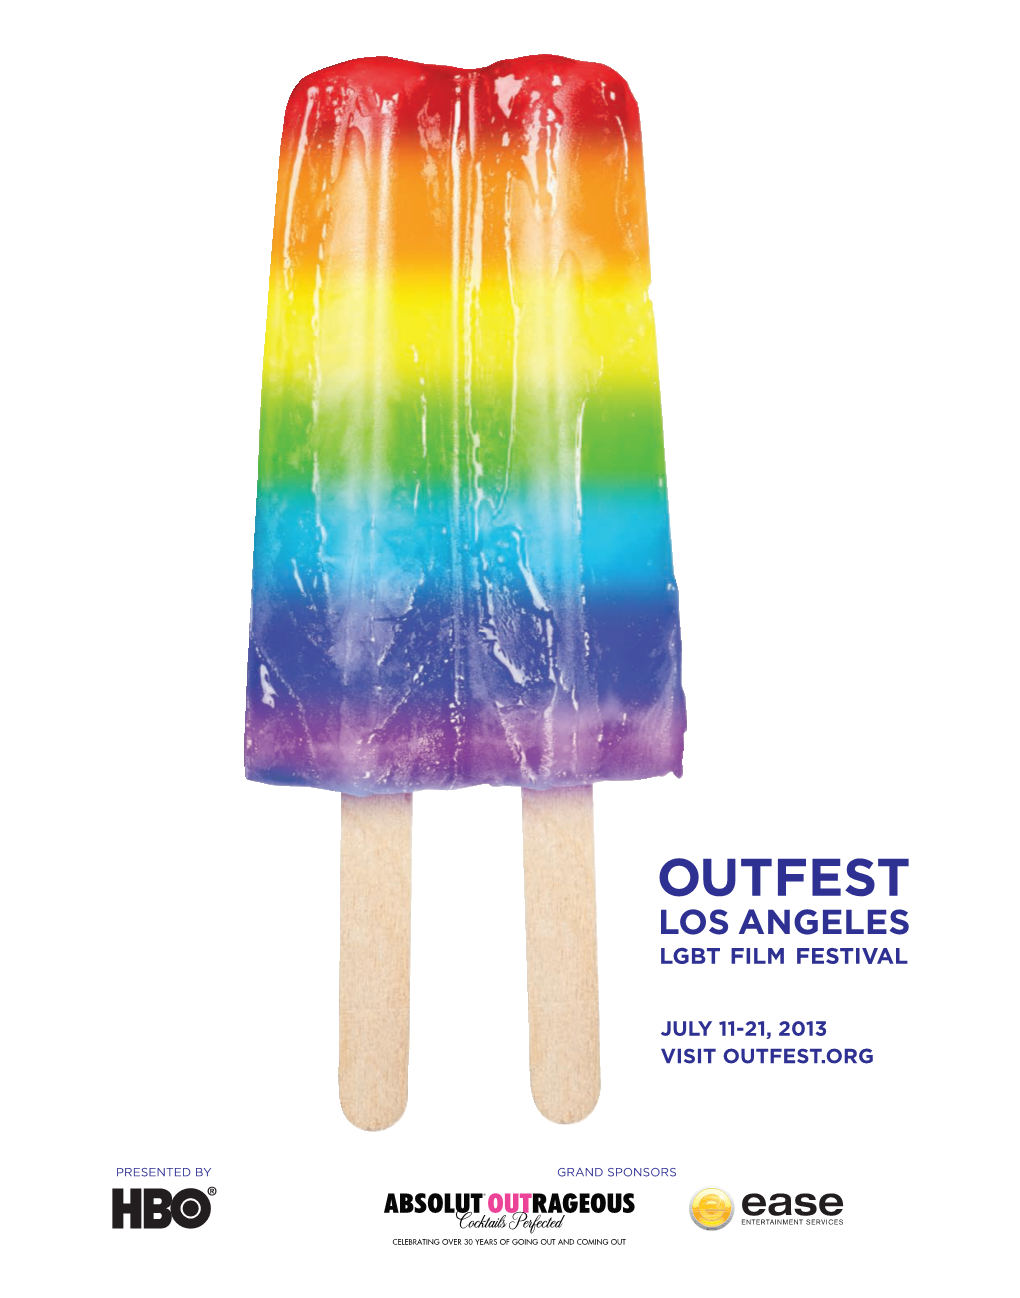 Outfest #Outfest 5